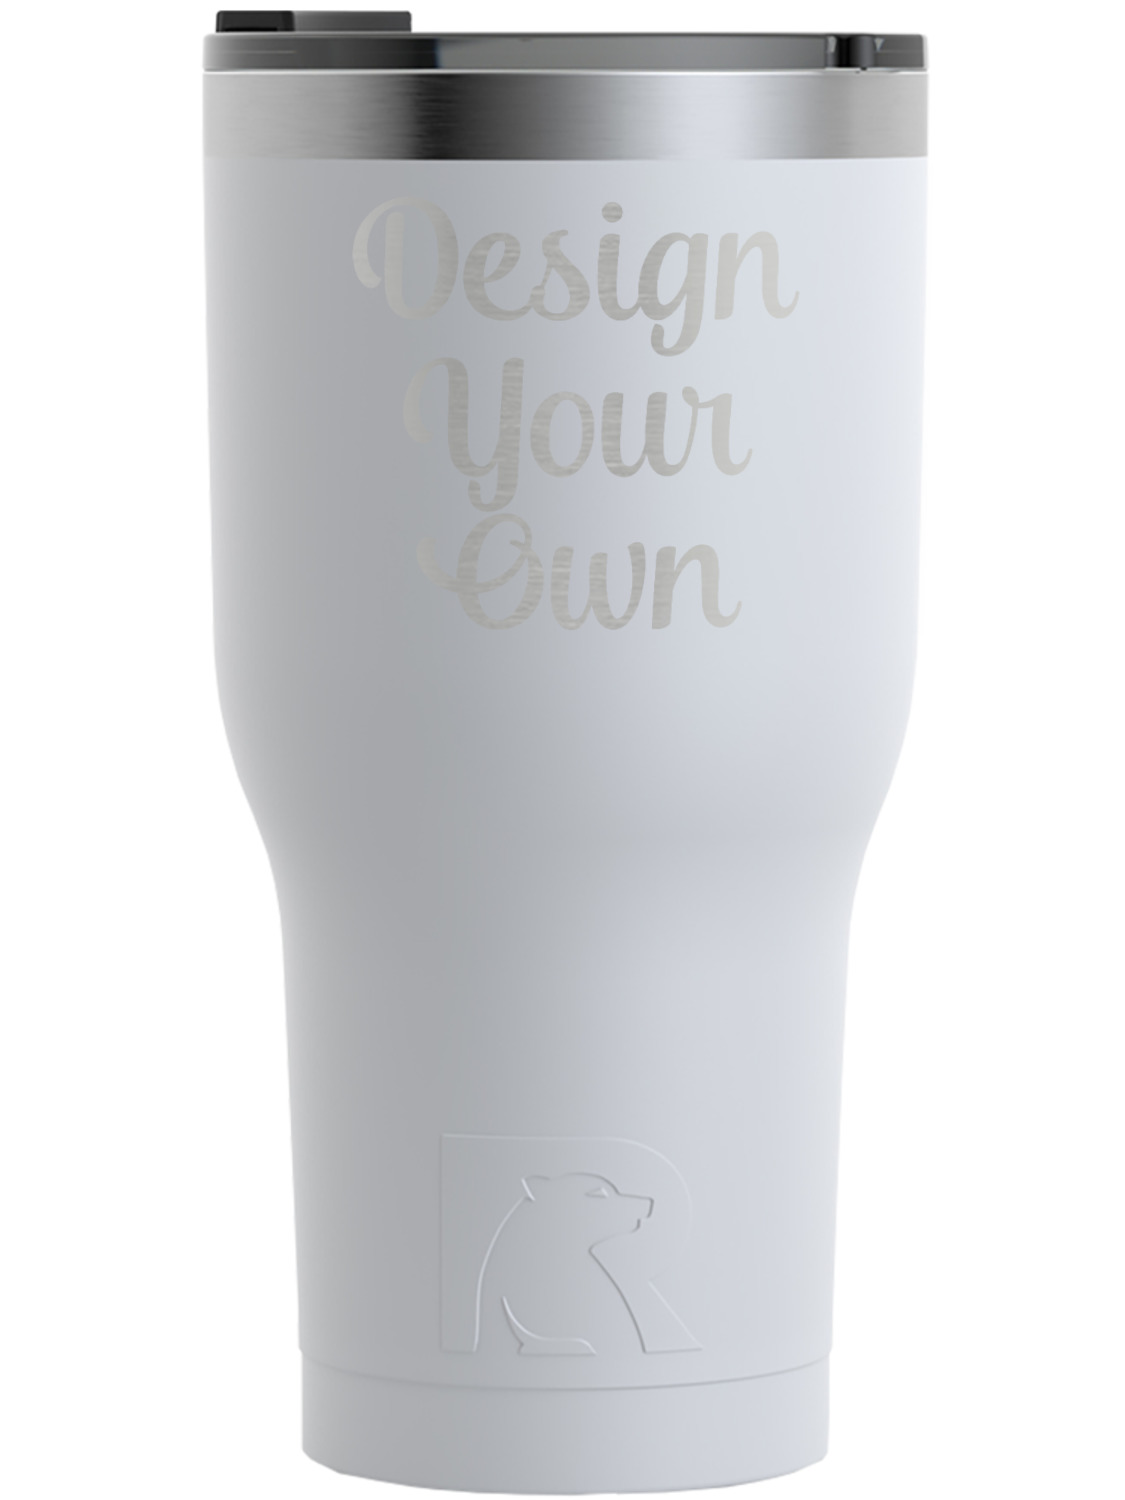 https://www.youcustomizeit.com/common/MAKE/965833/Design-Your-Own-White-RTIC-Tumbler-Front.jpg?lm=1665685798